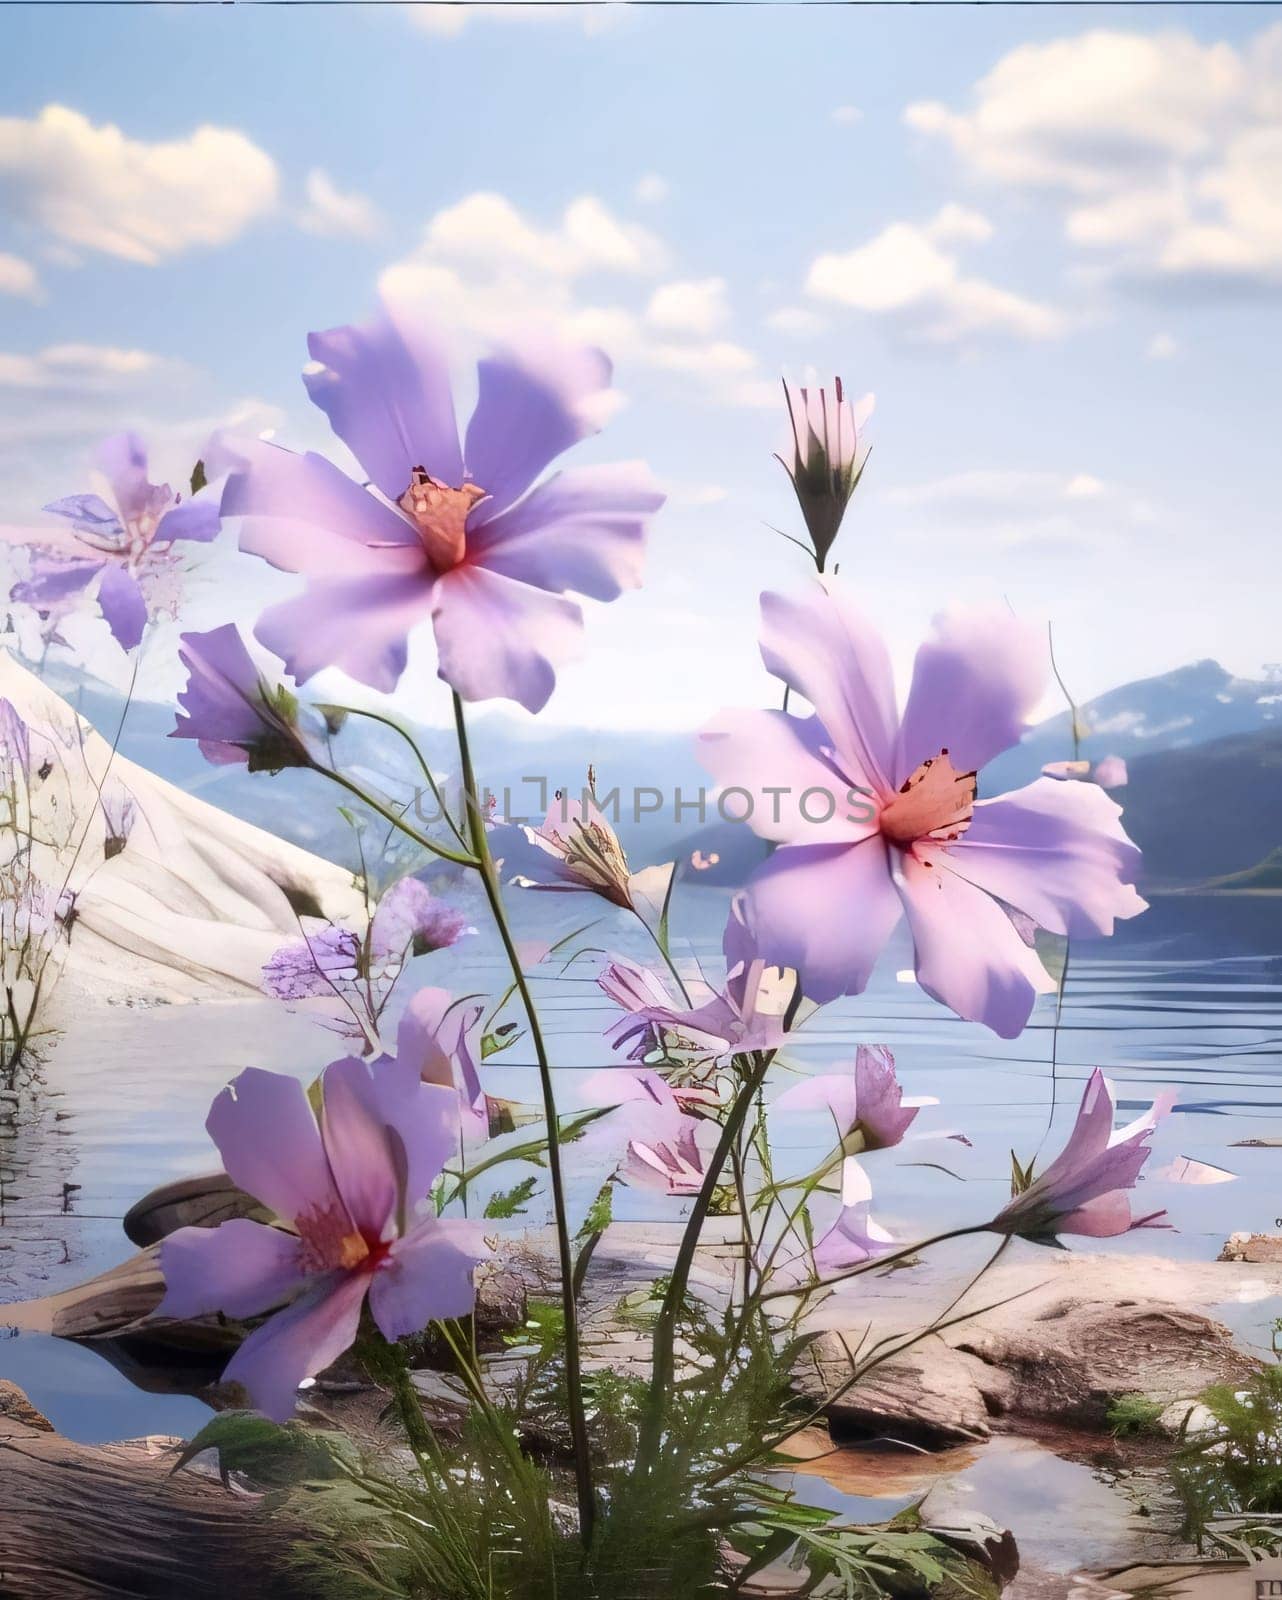 Pink flowers by the lake, with mountains in the background. Flowering flowers, a symbol of spring, new life. by ThemesS